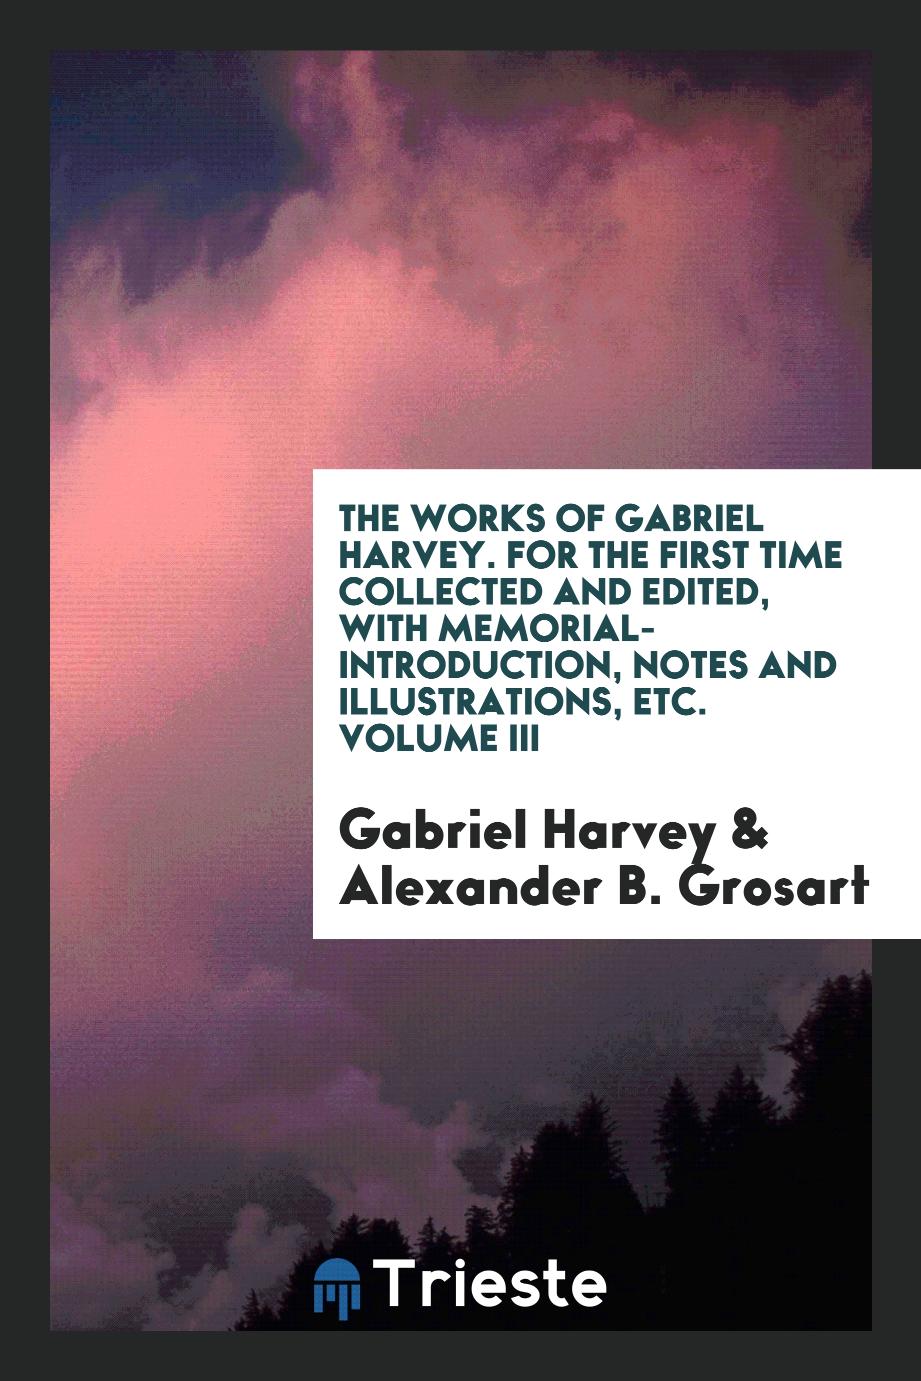 The works of Gabriel Harvey. For the first time collected and edited, with memorial-introduction, notes and illustrations, etc. Volume III